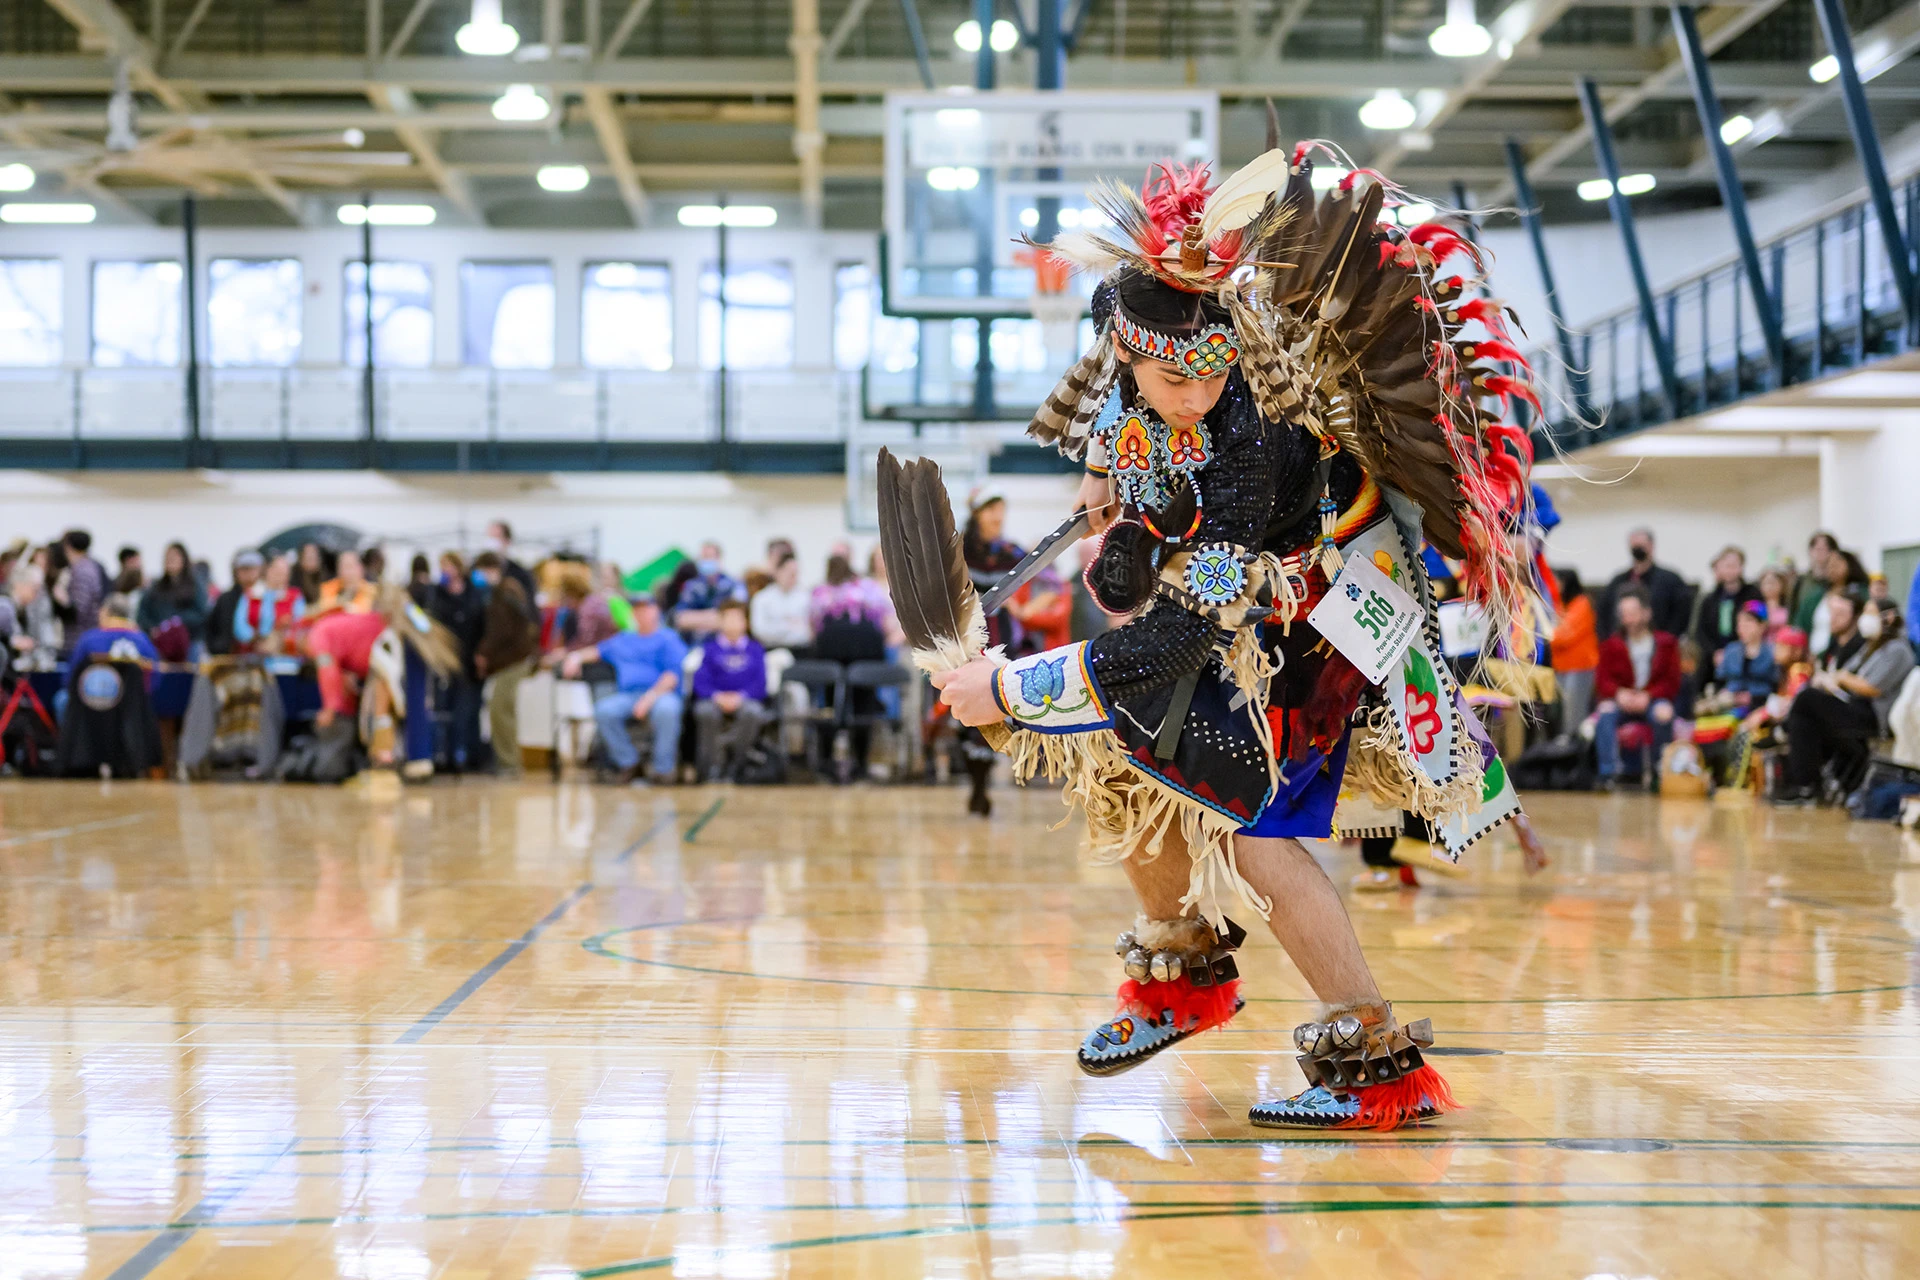 Powwow dancer cross steps facing the camera holding feathers